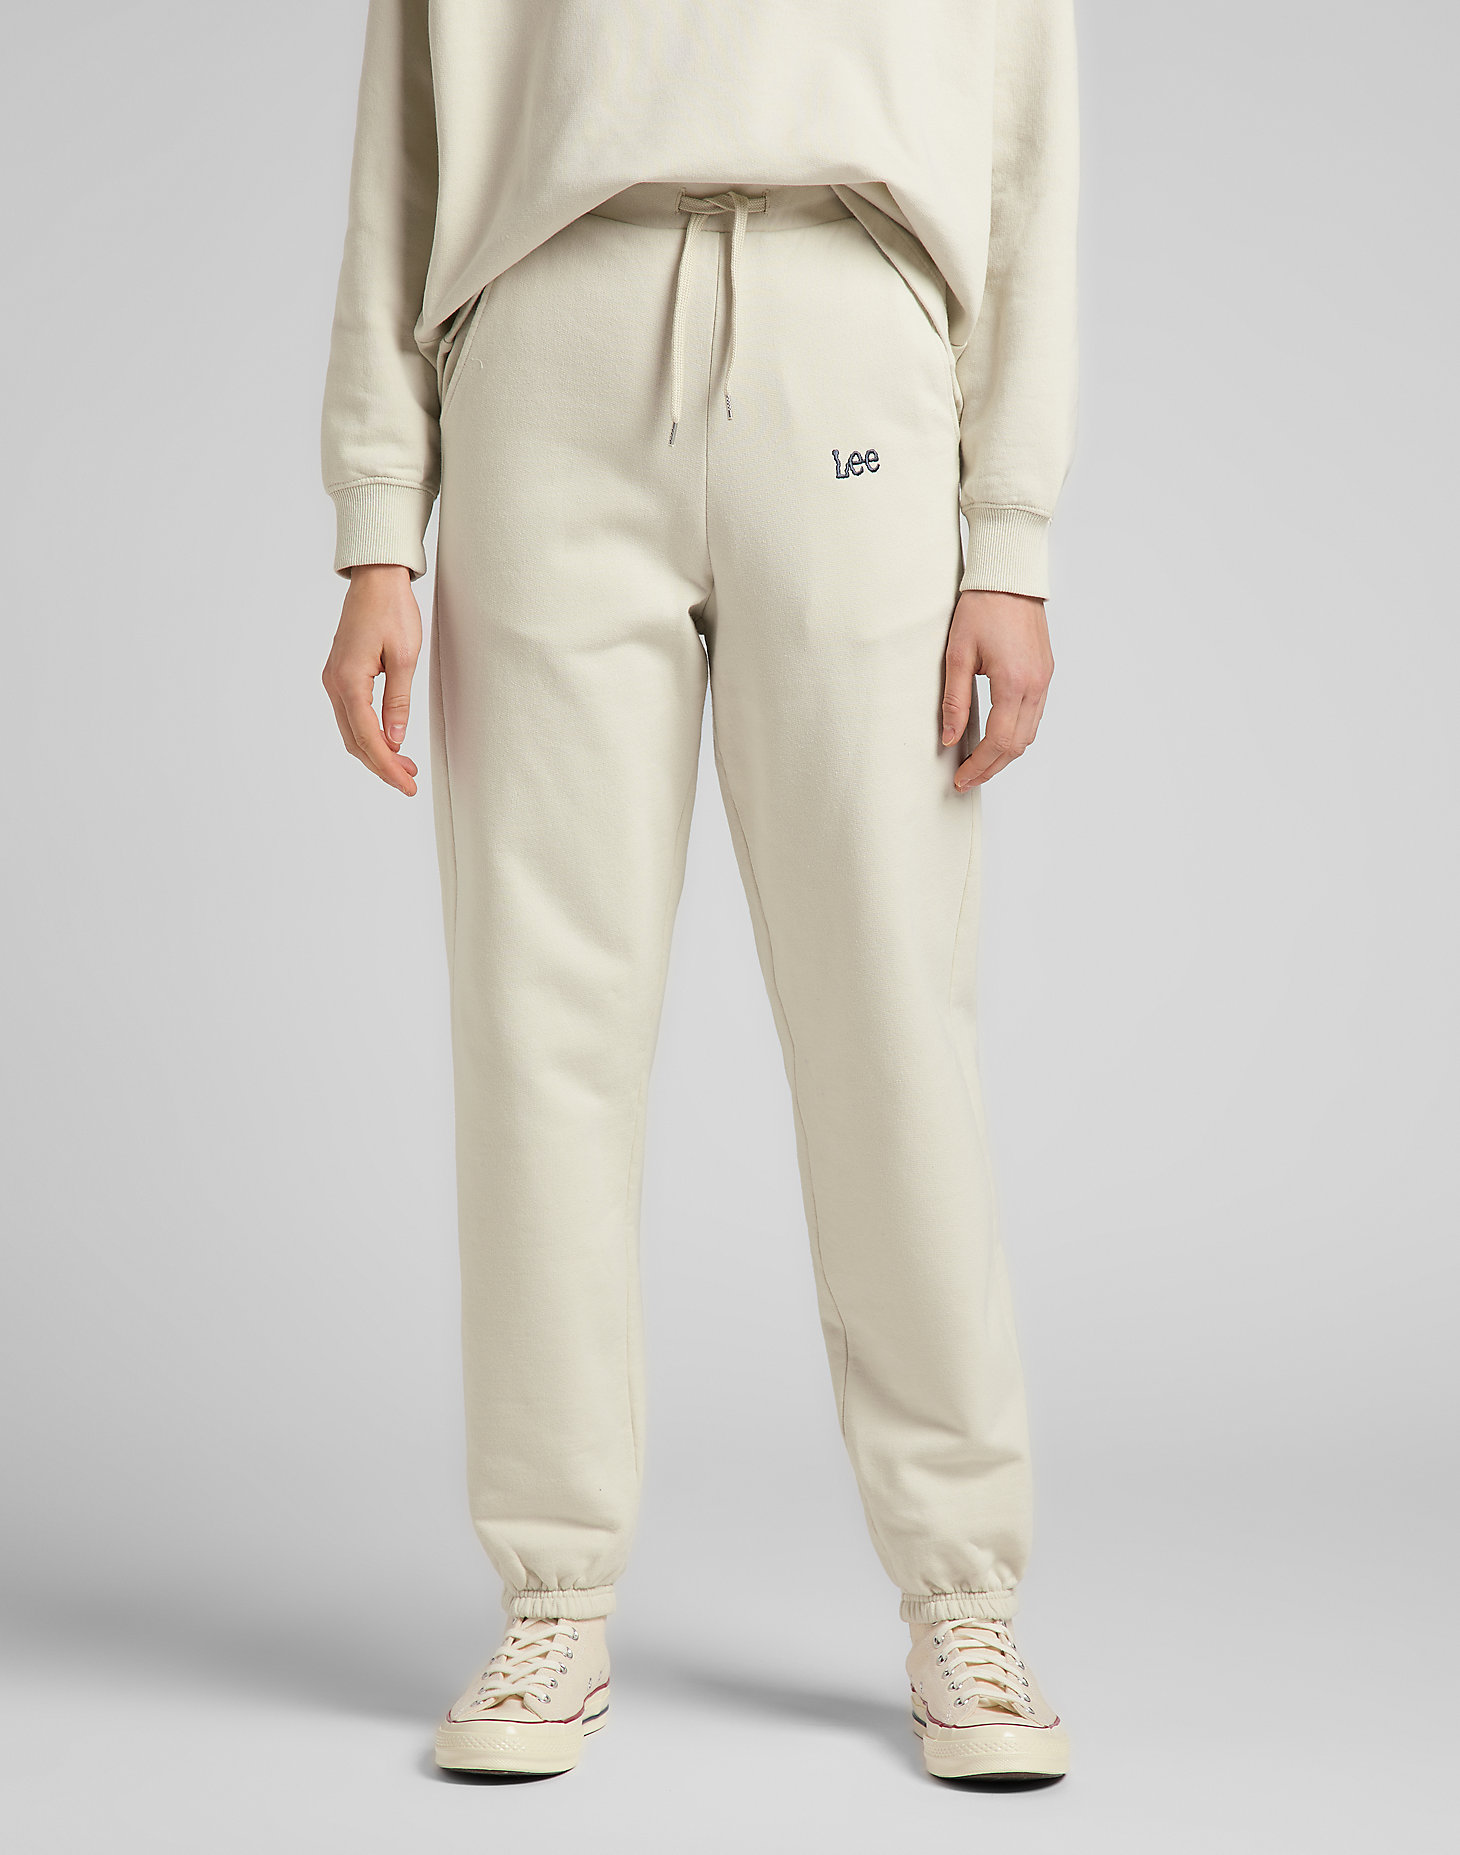 Relaxed Sweatpants in Workwear White main view